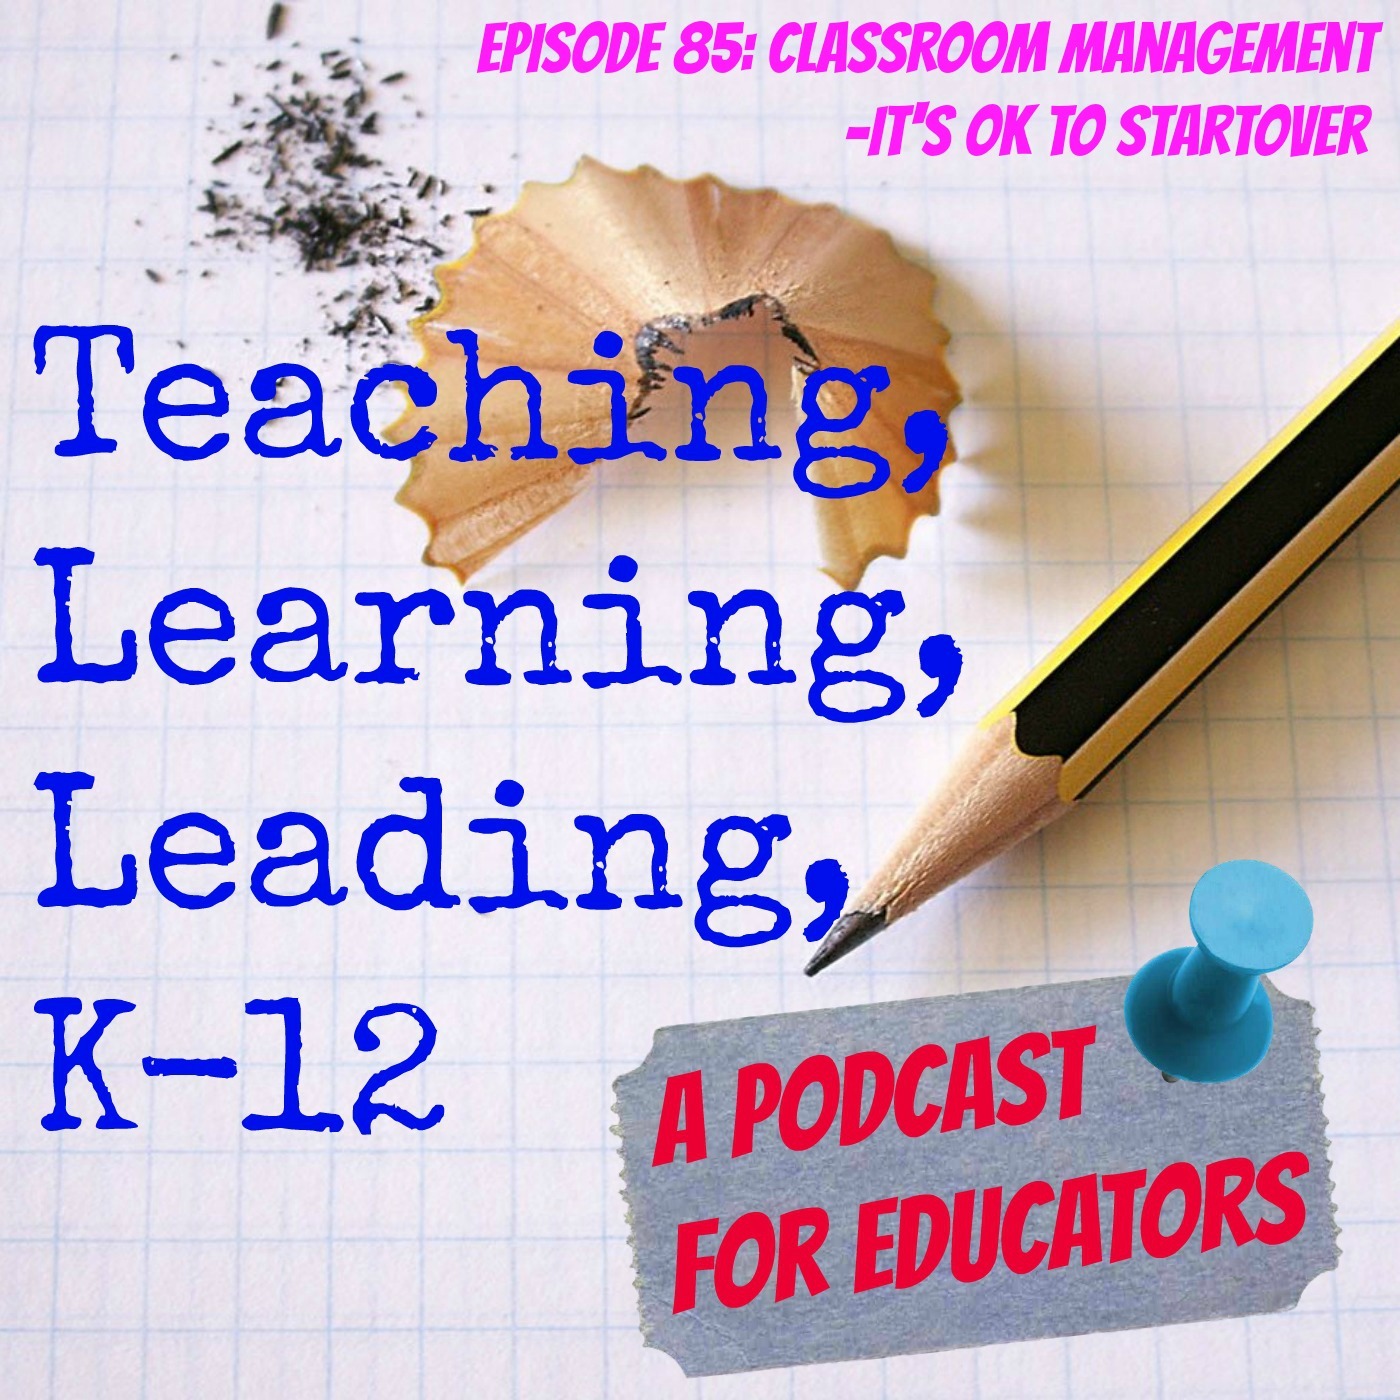 Episode 85: Classroom Management: It's OK to Startover